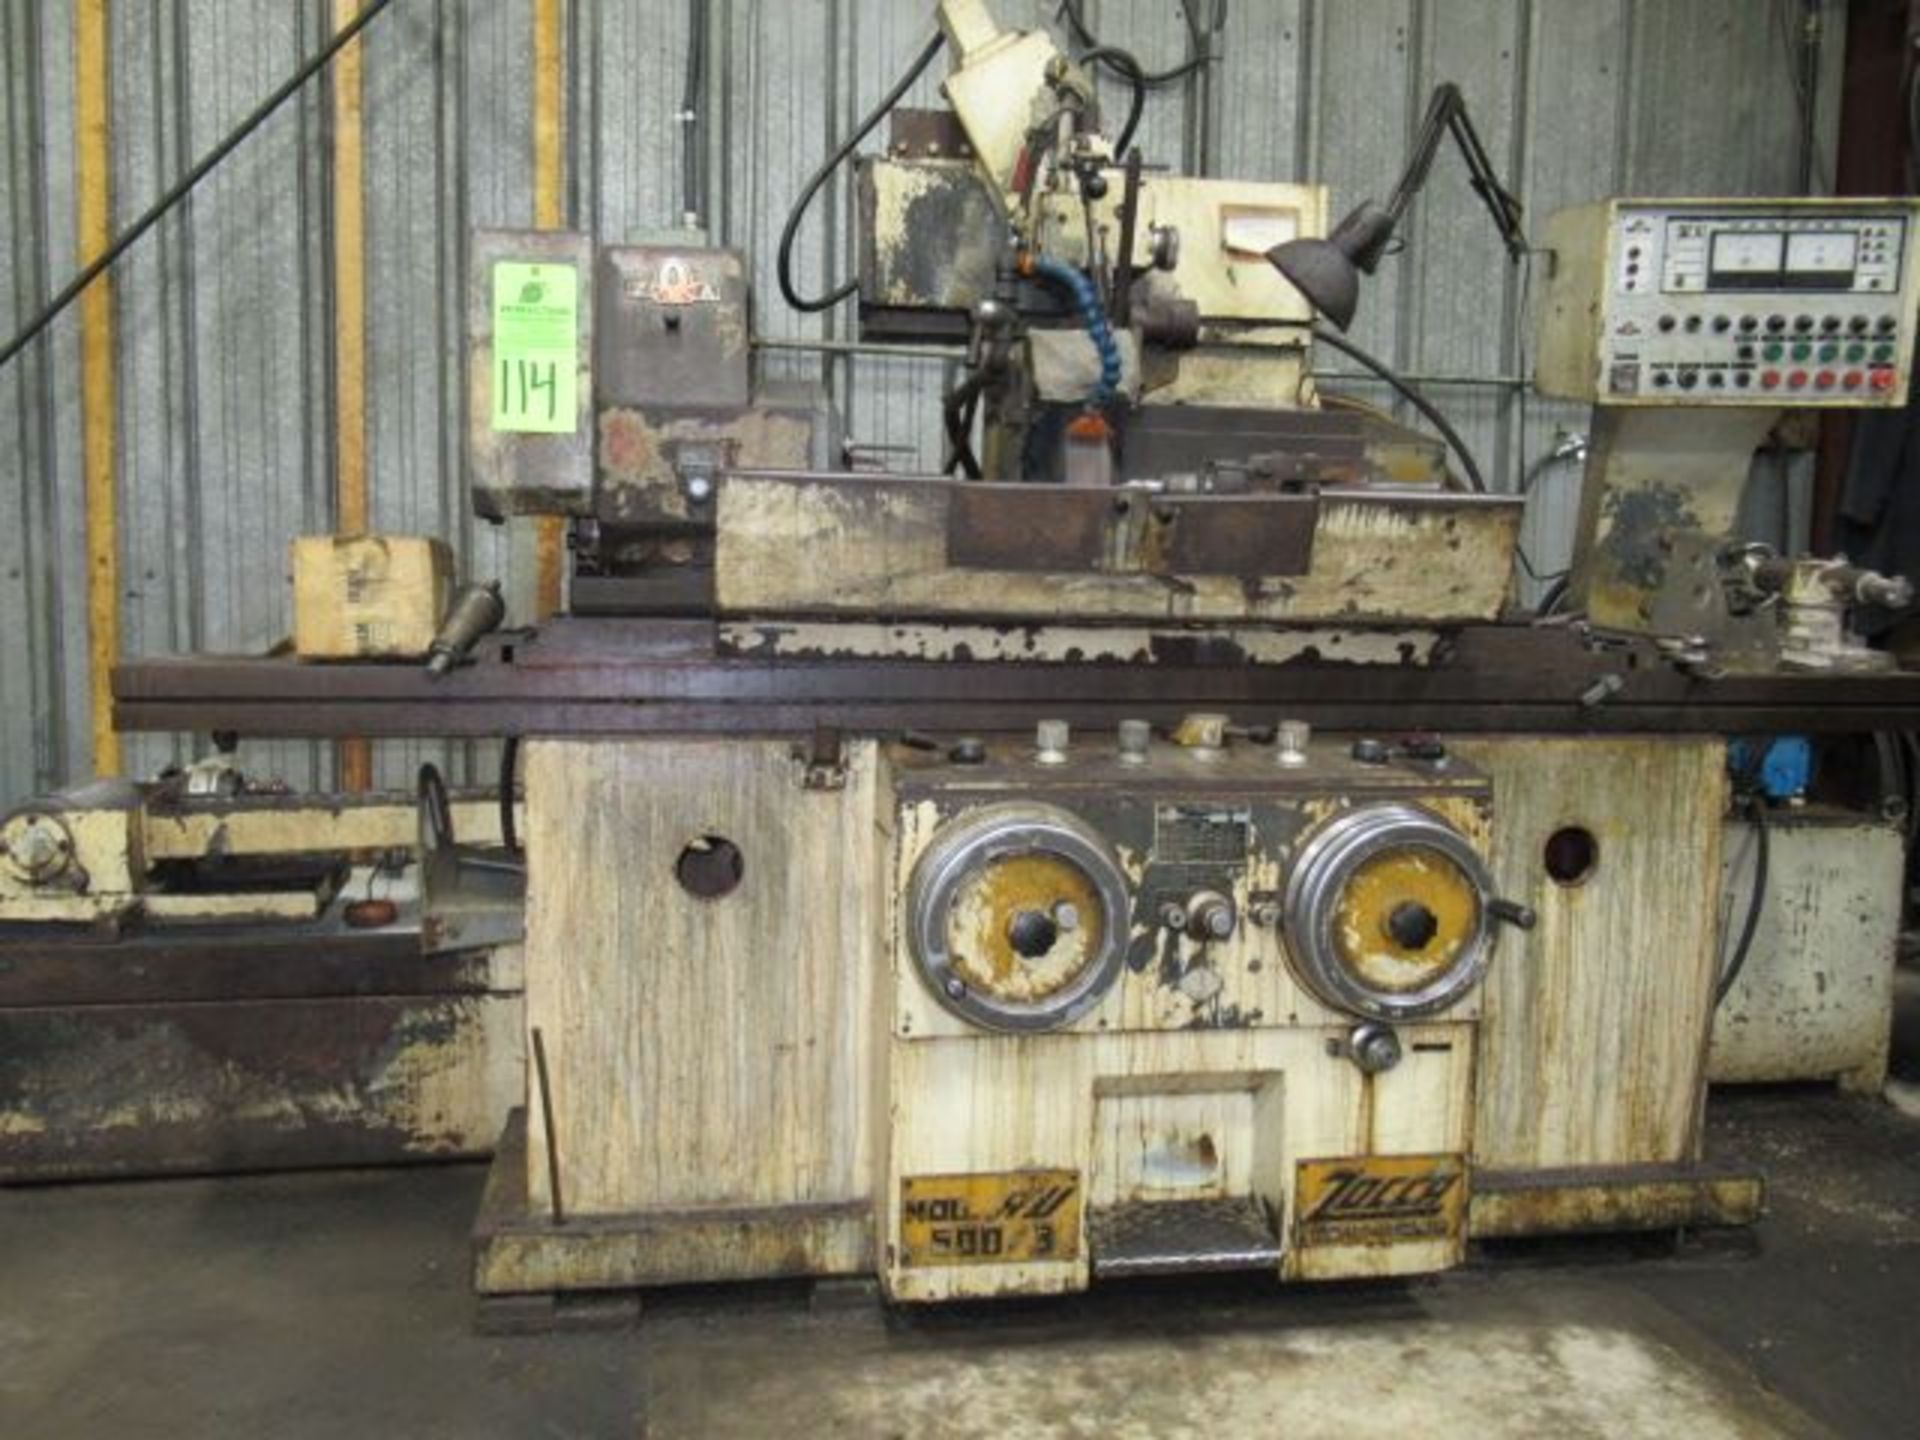 ZOCCA RW500/3 Universal Cylindrical Grinder, s/n 3119 ($900 Rigging Cost) - Image 2 of 6